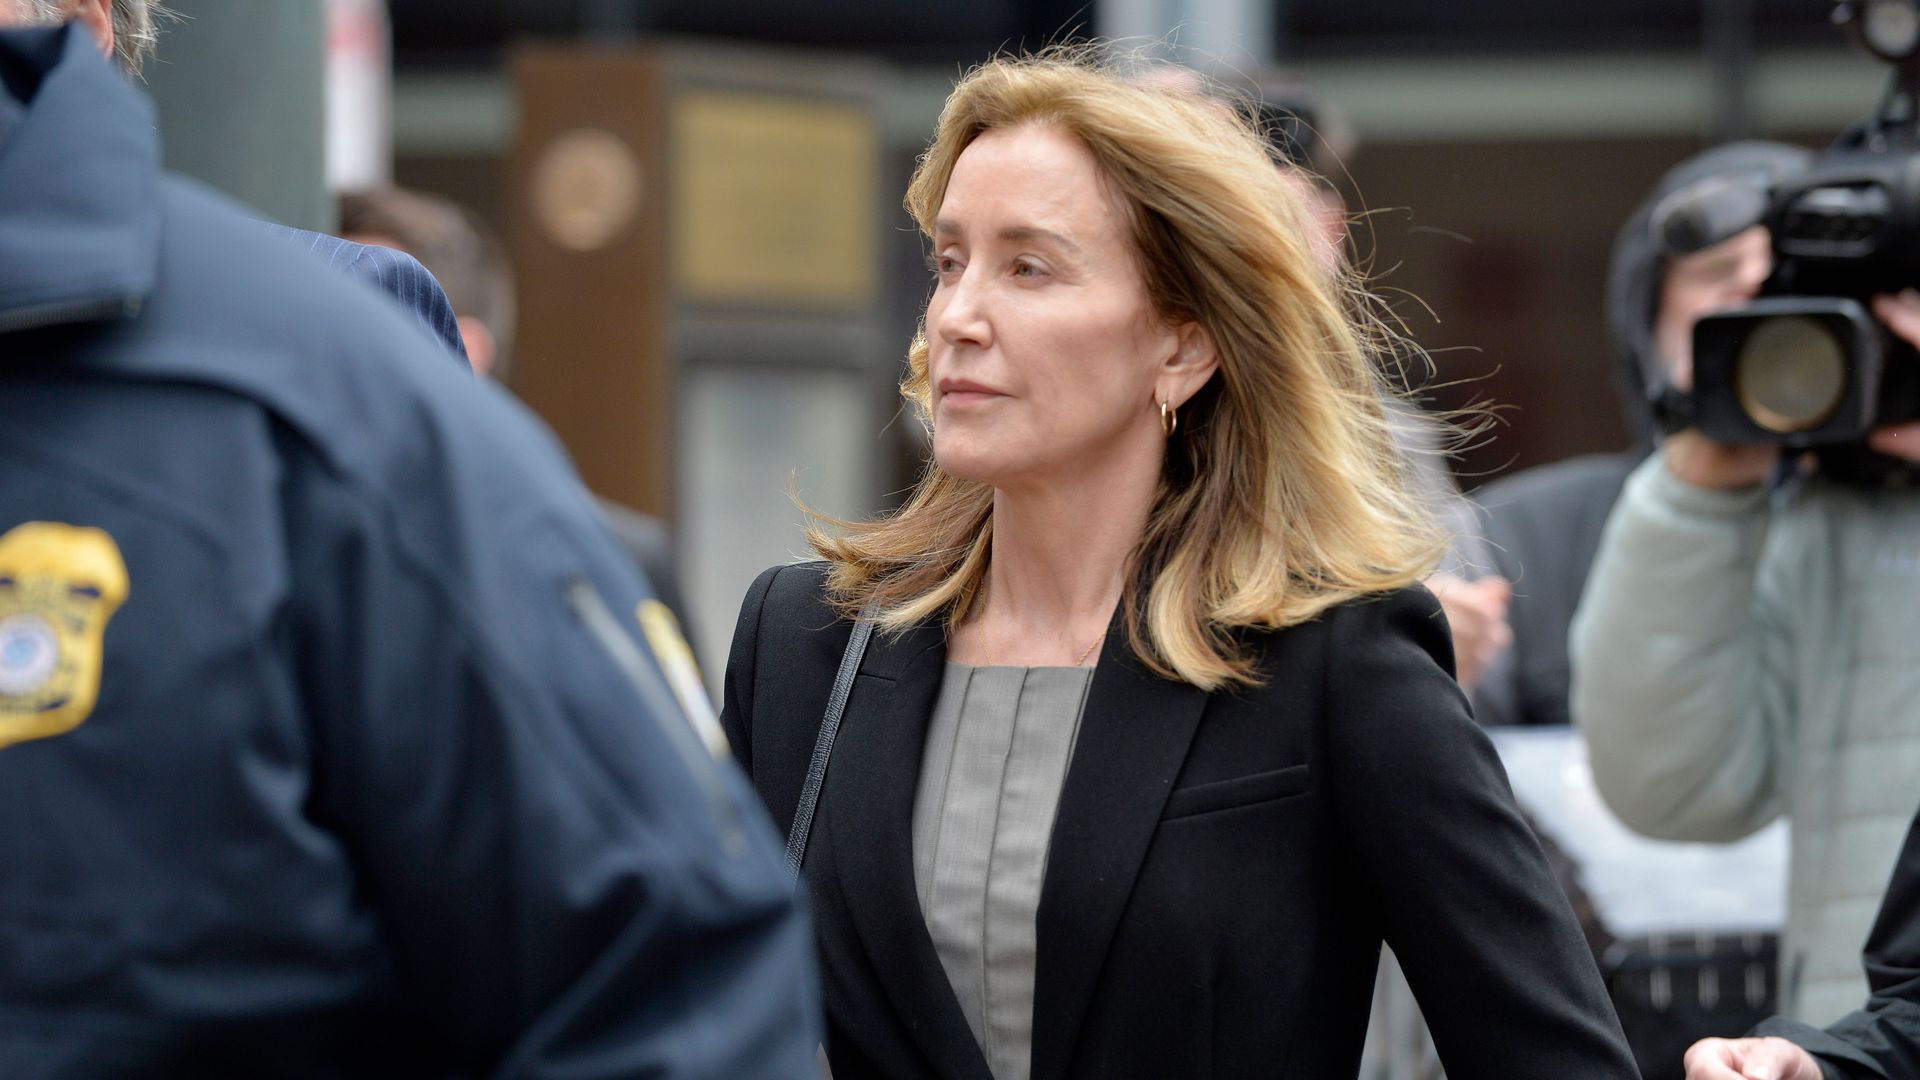 Actress Felicity Huffman is escorted by Police into court on May 13, 2019 in Boston, Massachusetts.